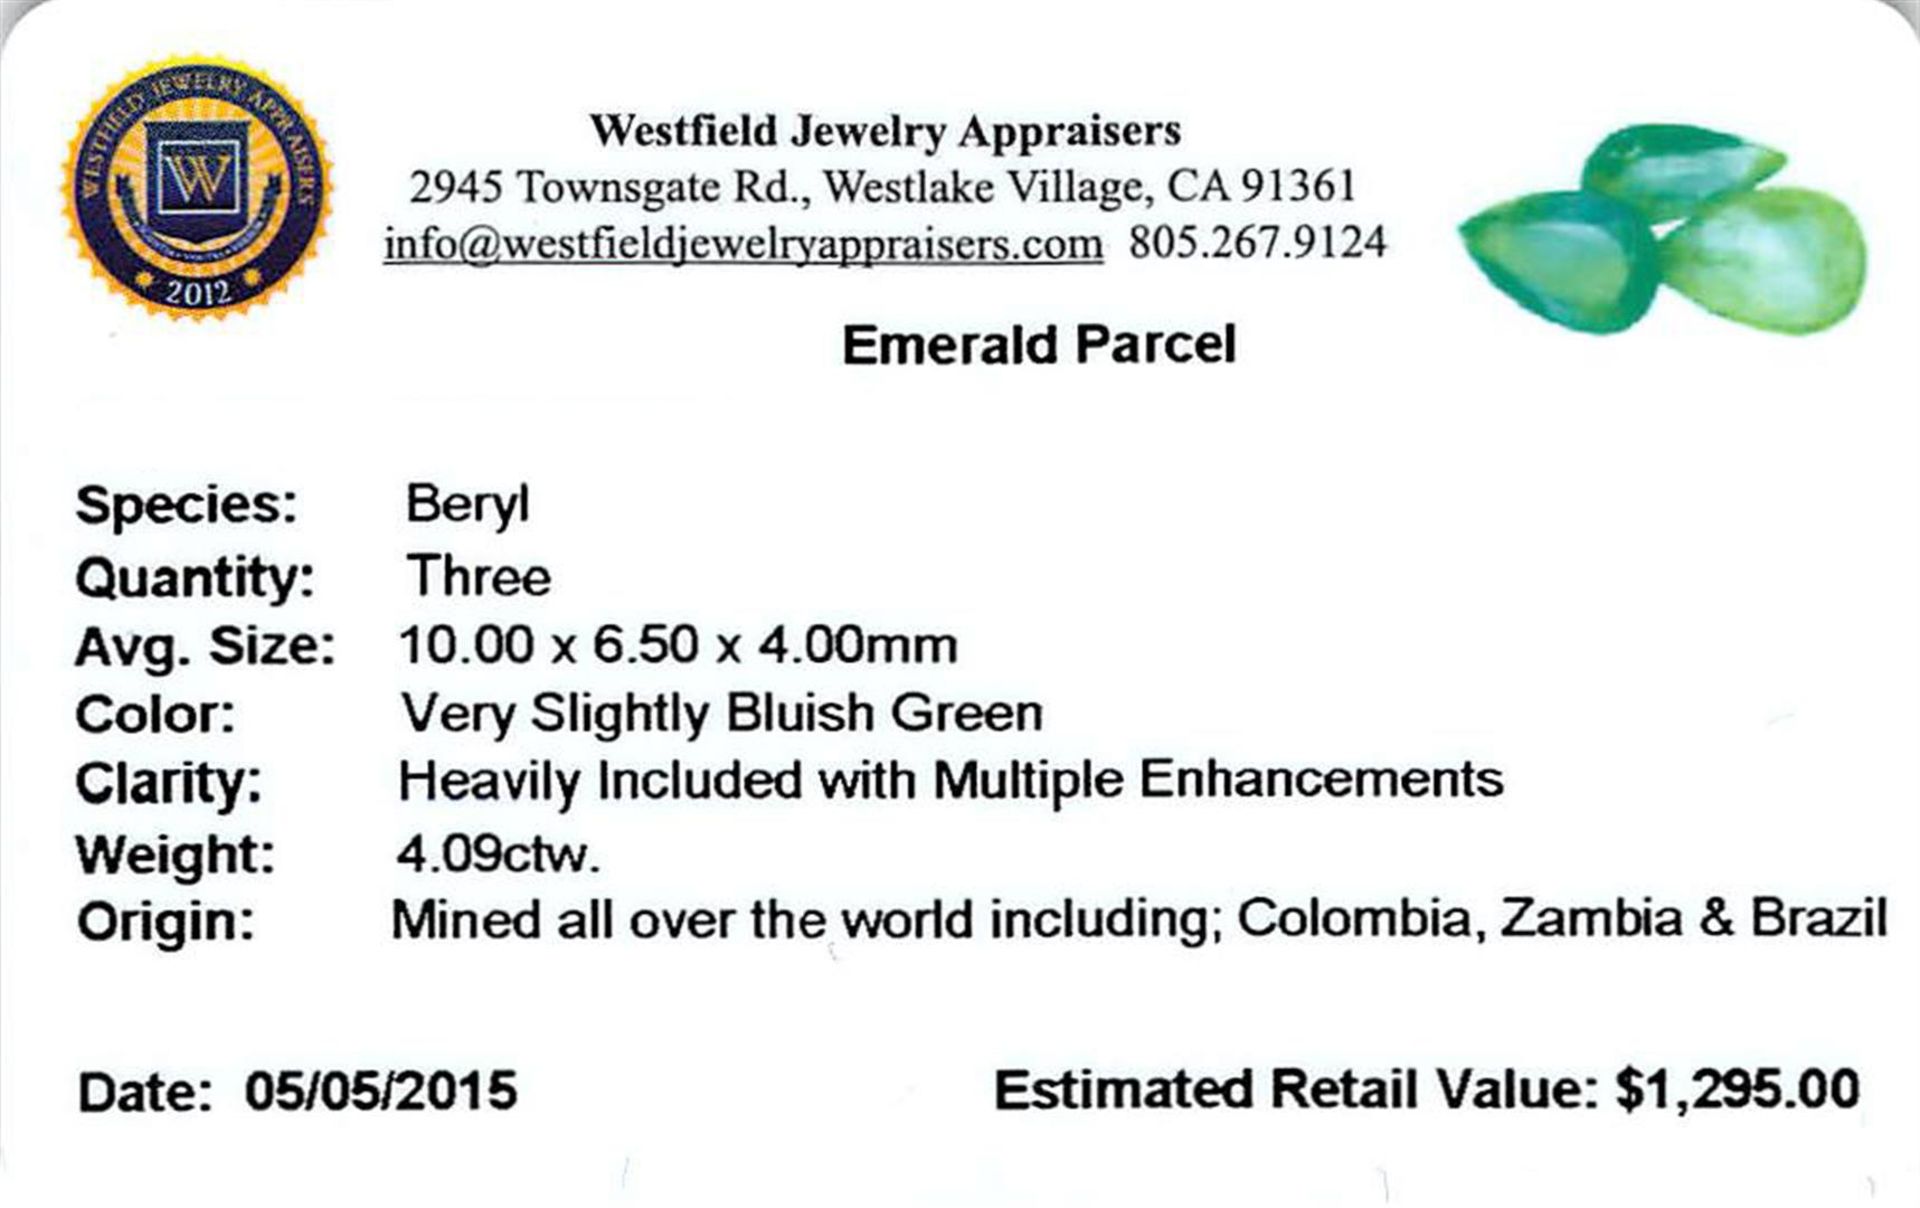 4.09 ctw Pear Mixed Emerald Parcel - Image 2 of 2